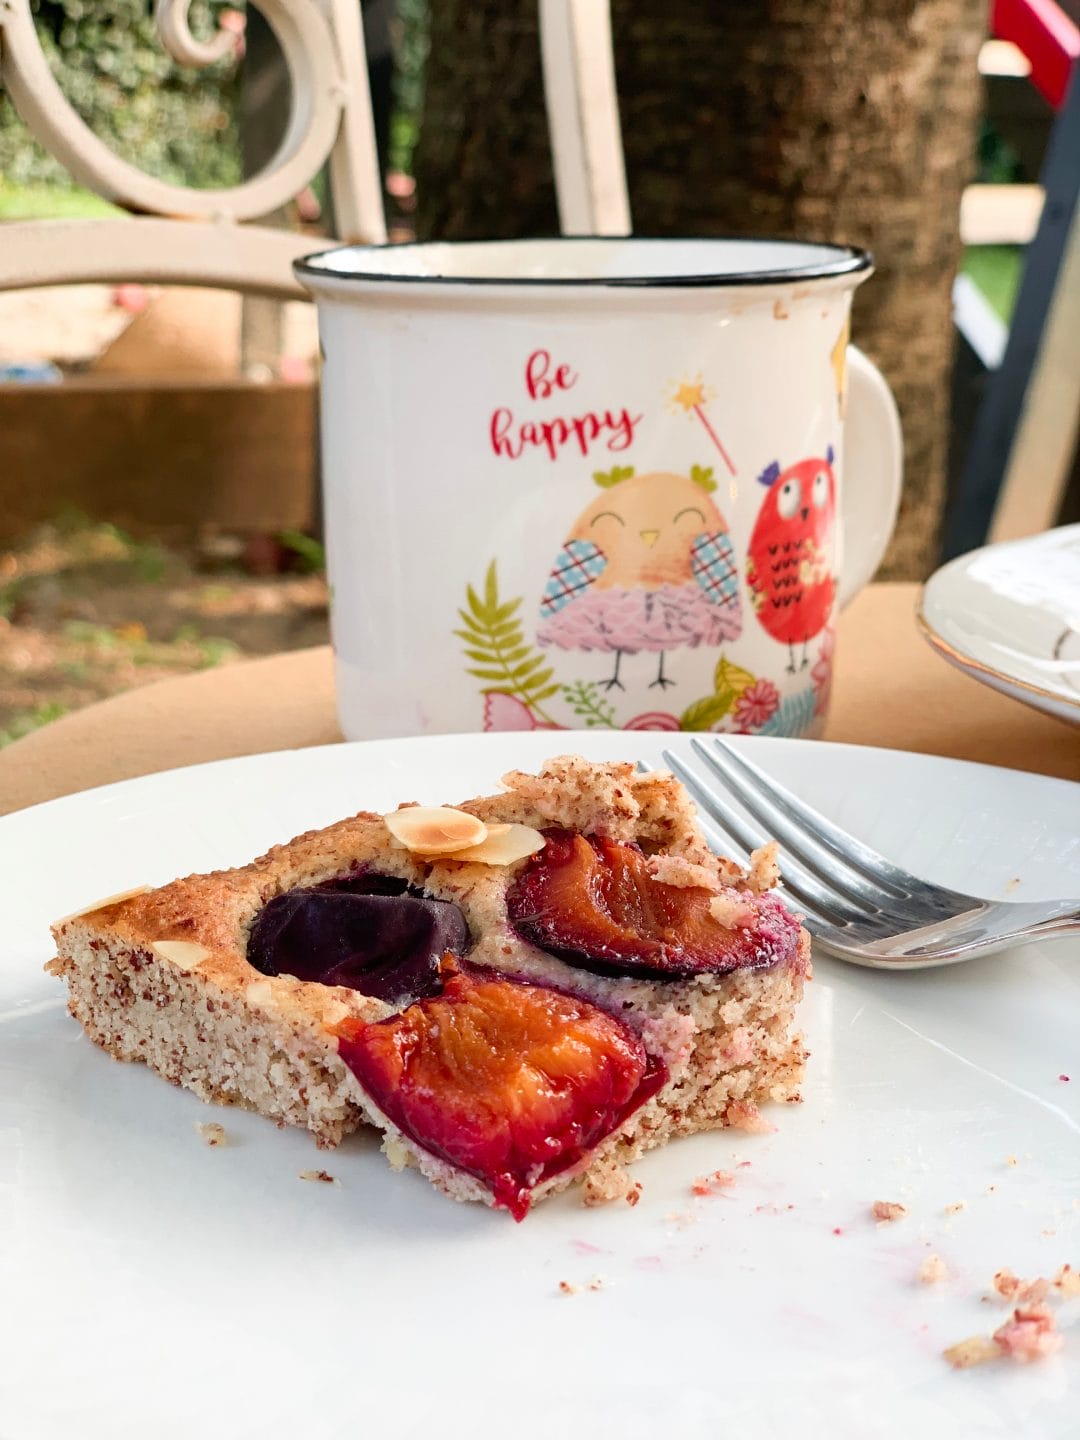 Picture of a slice of lchf plum pie on a table in the garden